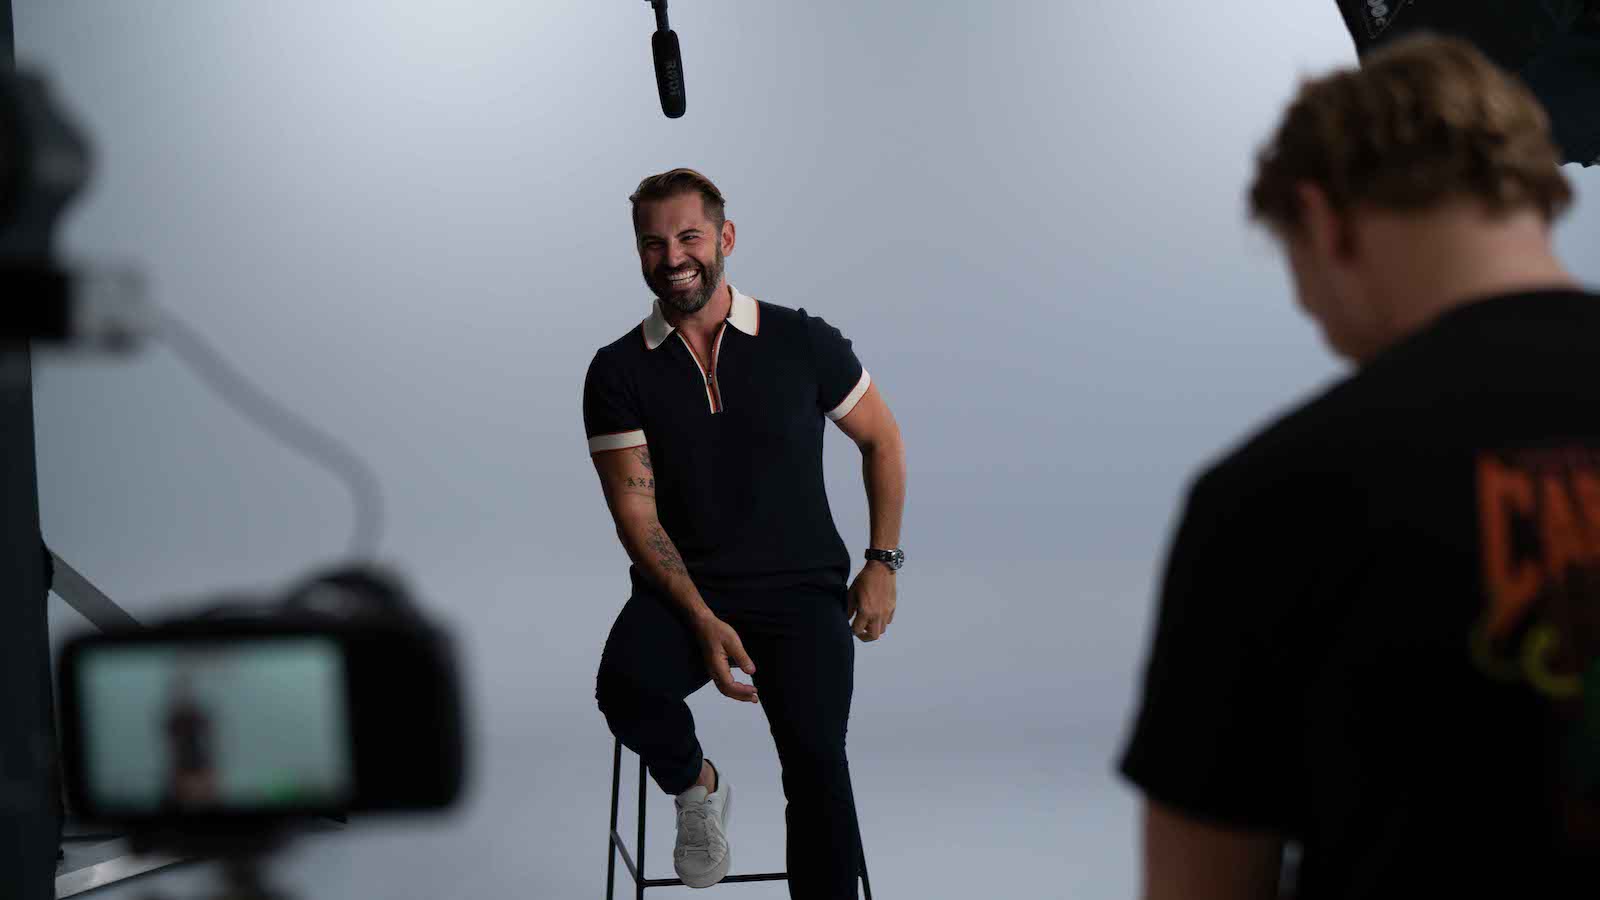 Daniel MacPherson Interview Reveals The Cold Hard Truth About Success In The Entertainment Industry